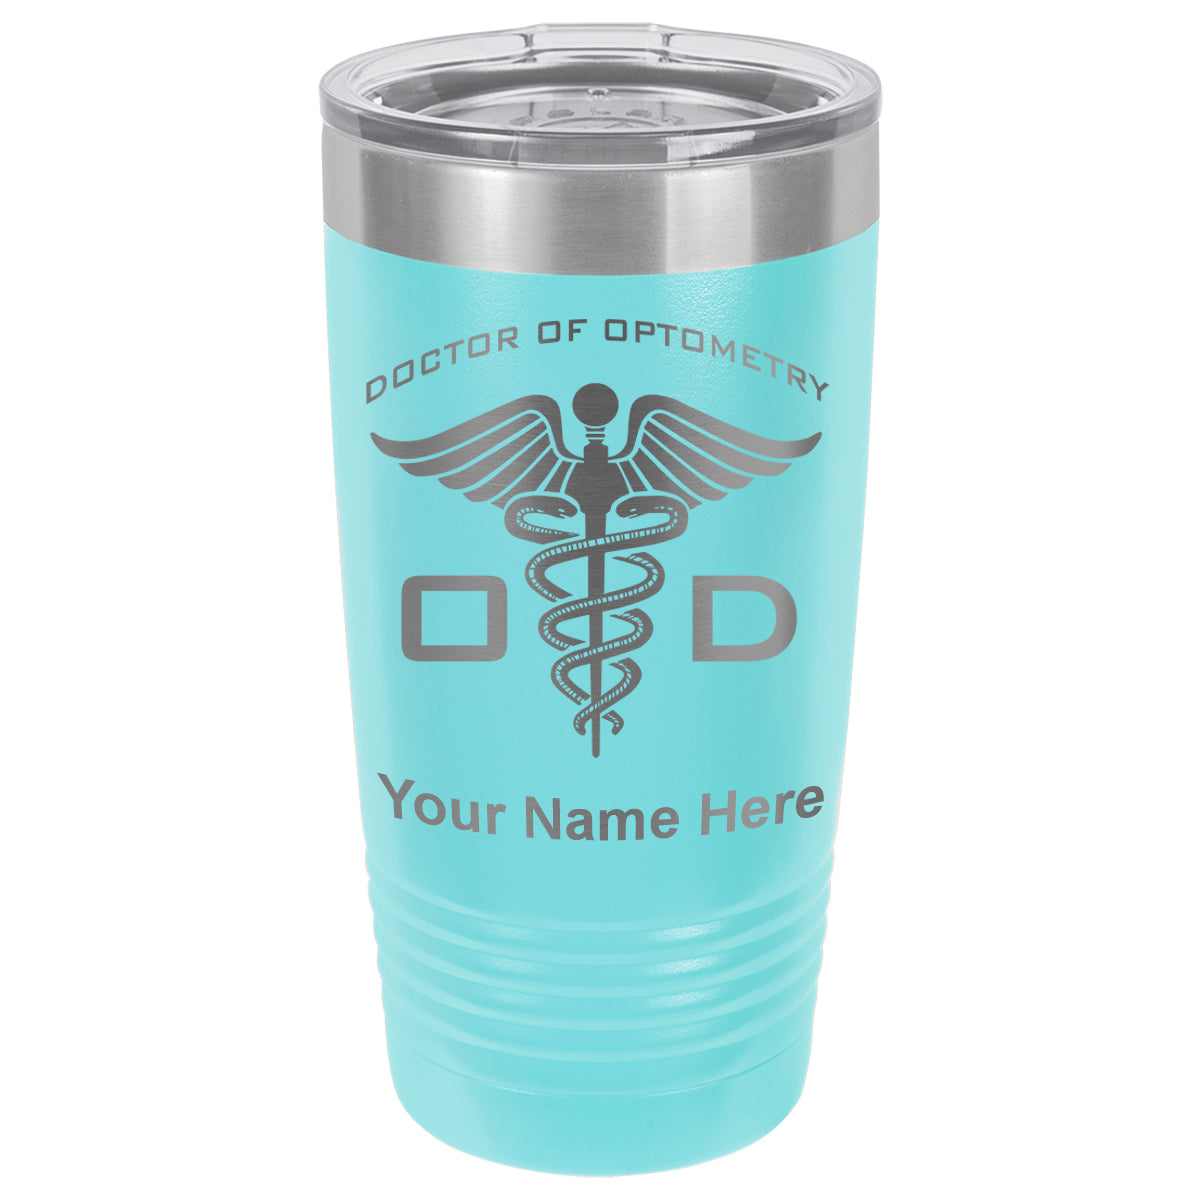 20oz Vacuum Insulated Tumbler Mug, OD Doctor of Optometry, Personalized Engraving Included